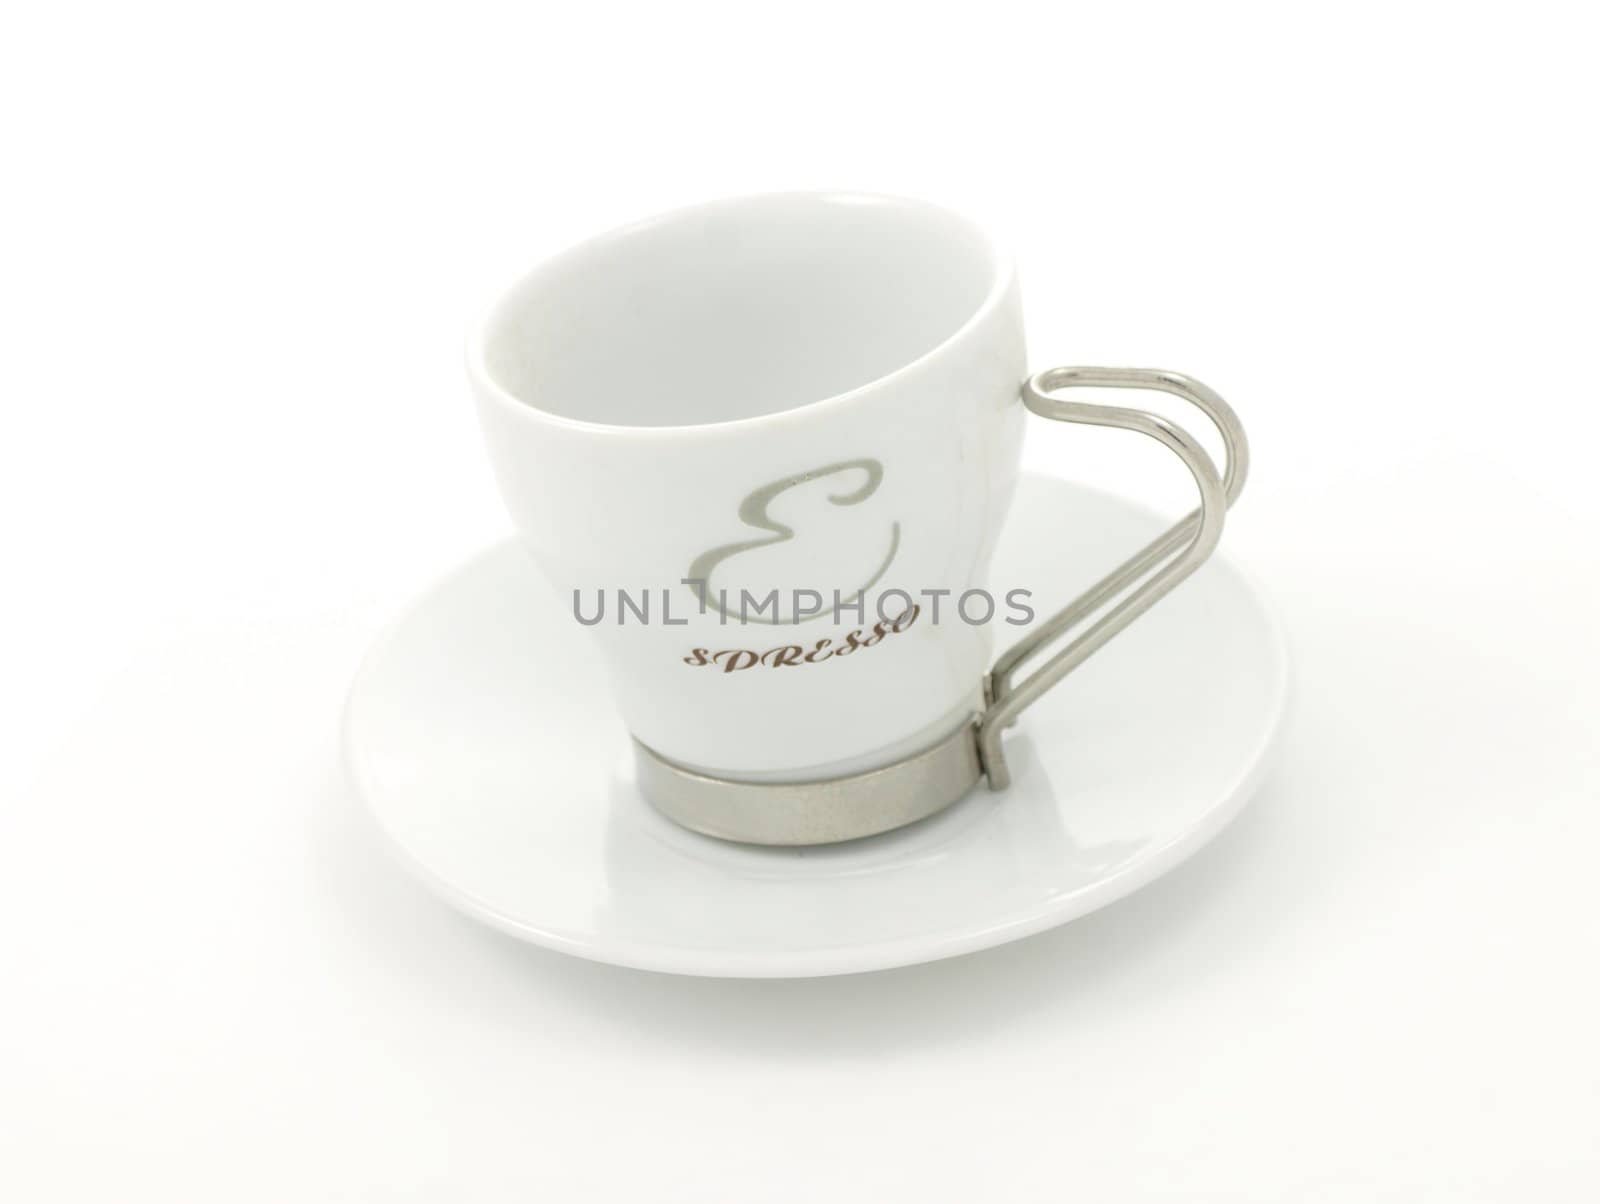 Espresso coffee cup, on plate, towards white